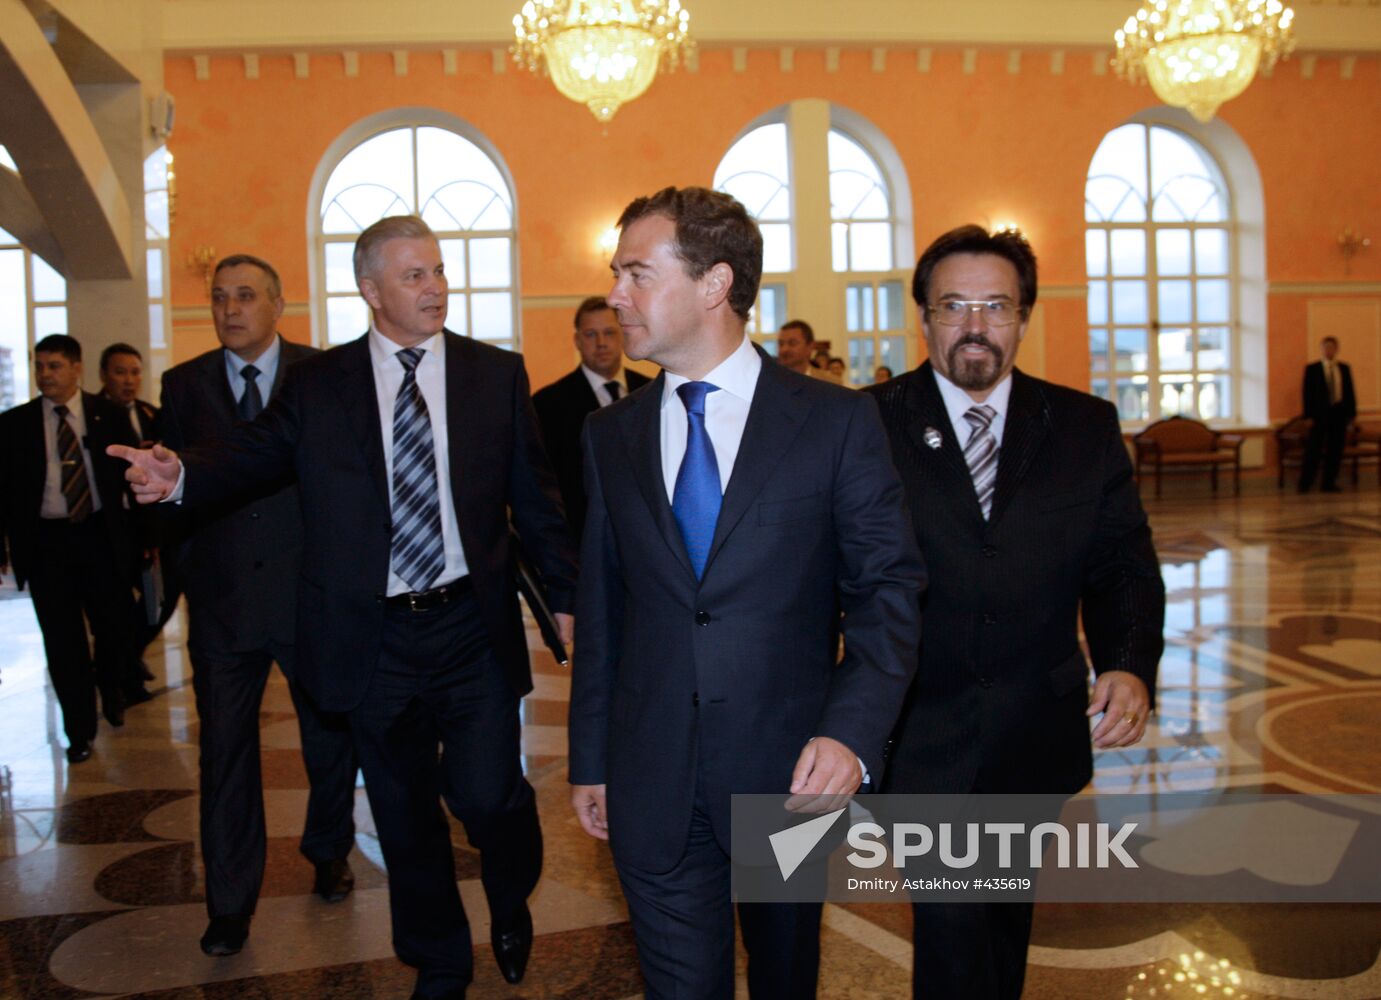 President Medvedev's working trip to Siberian Federal District